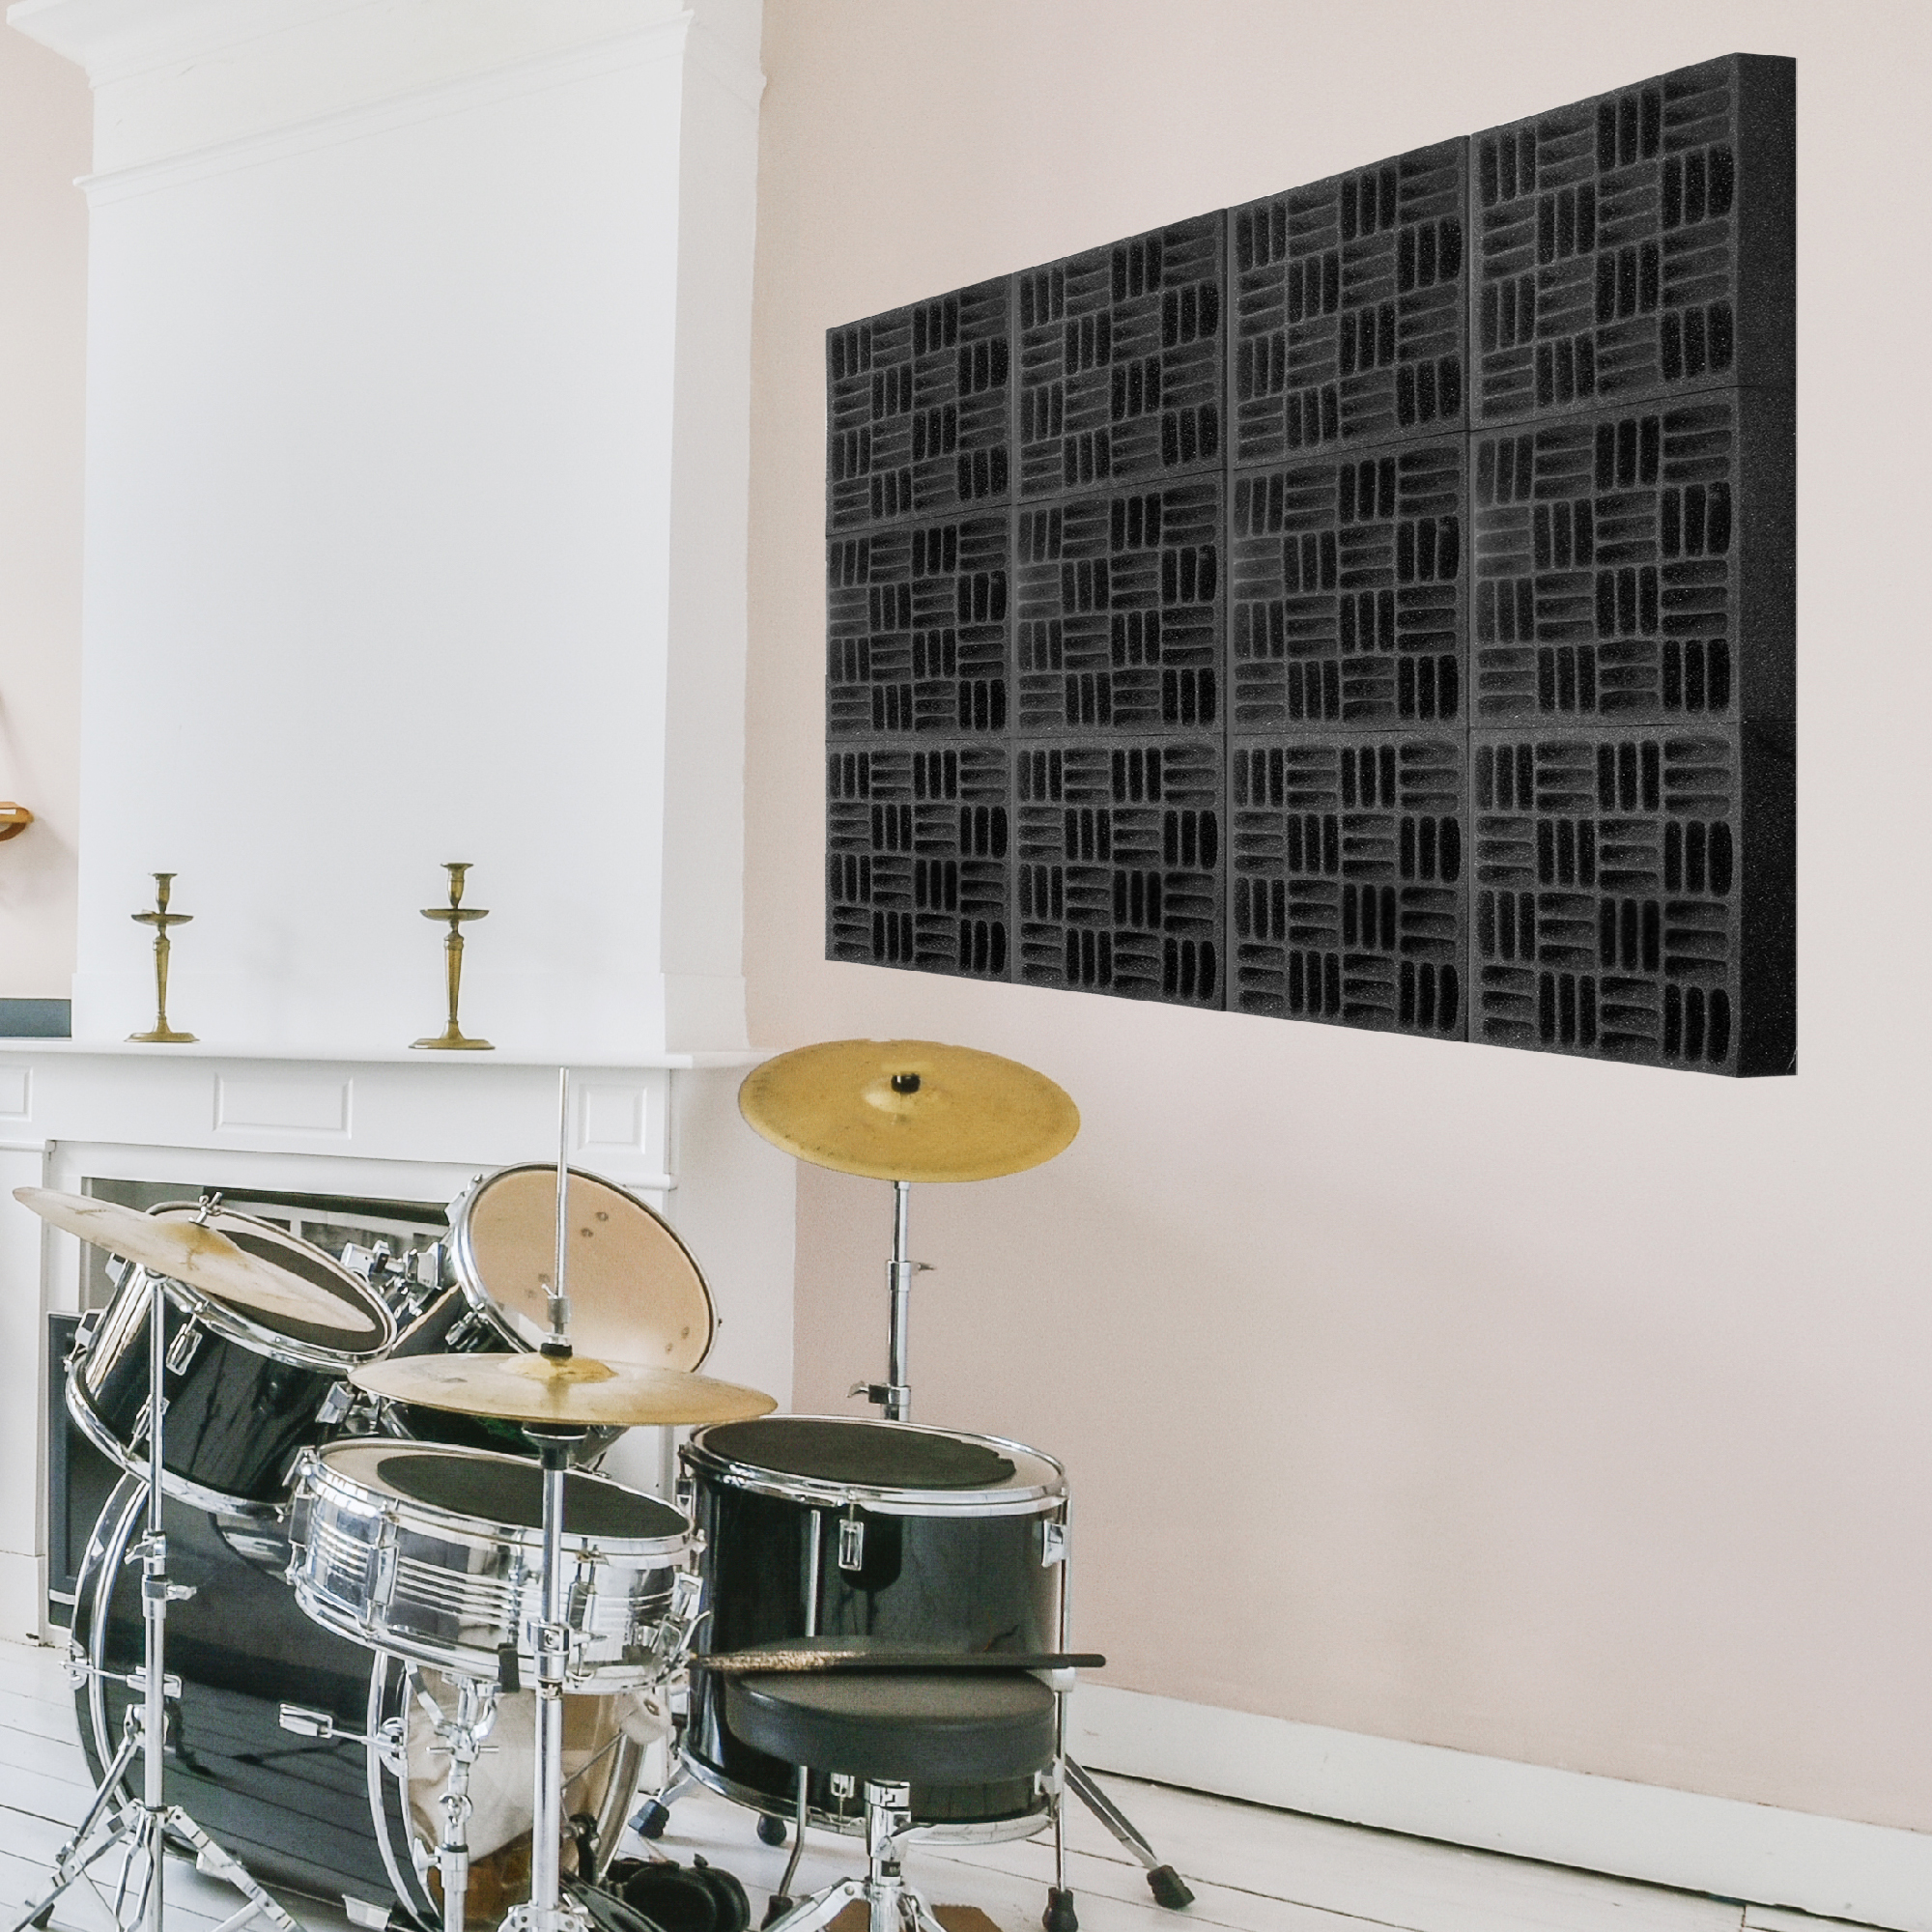 Foroomaco Launches Acoustic Panels and Bass Traps for Superior Sound Experience 1